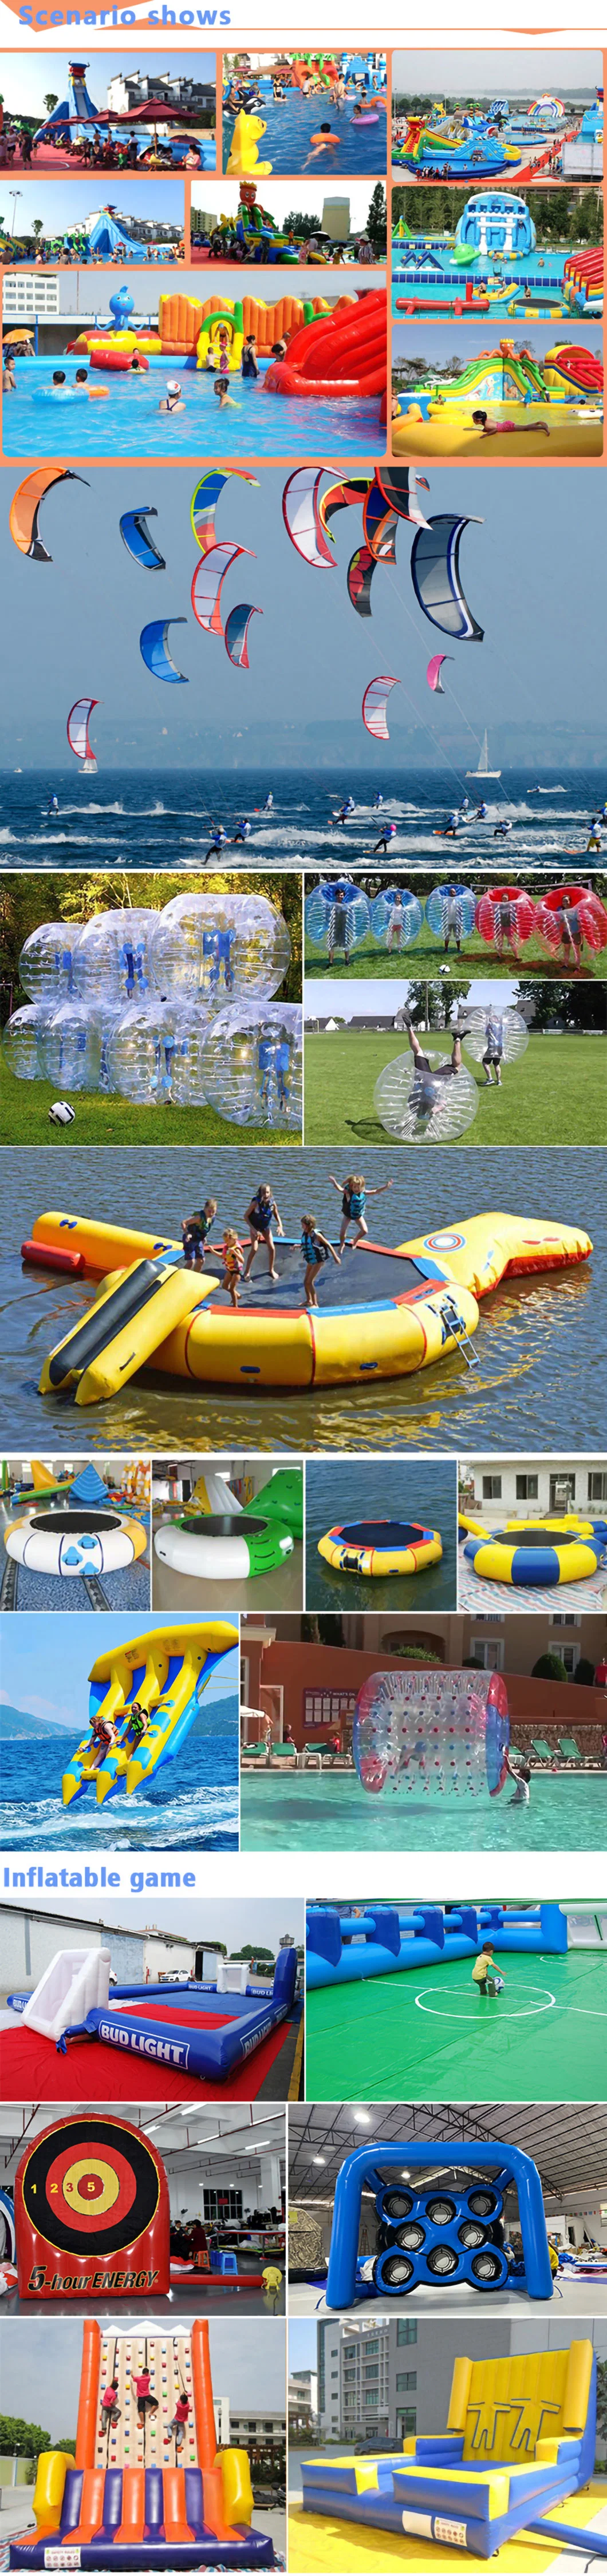 Portable Inflatable Soccer Bubble Bumper Ball Field/Inflatable Football Pitch